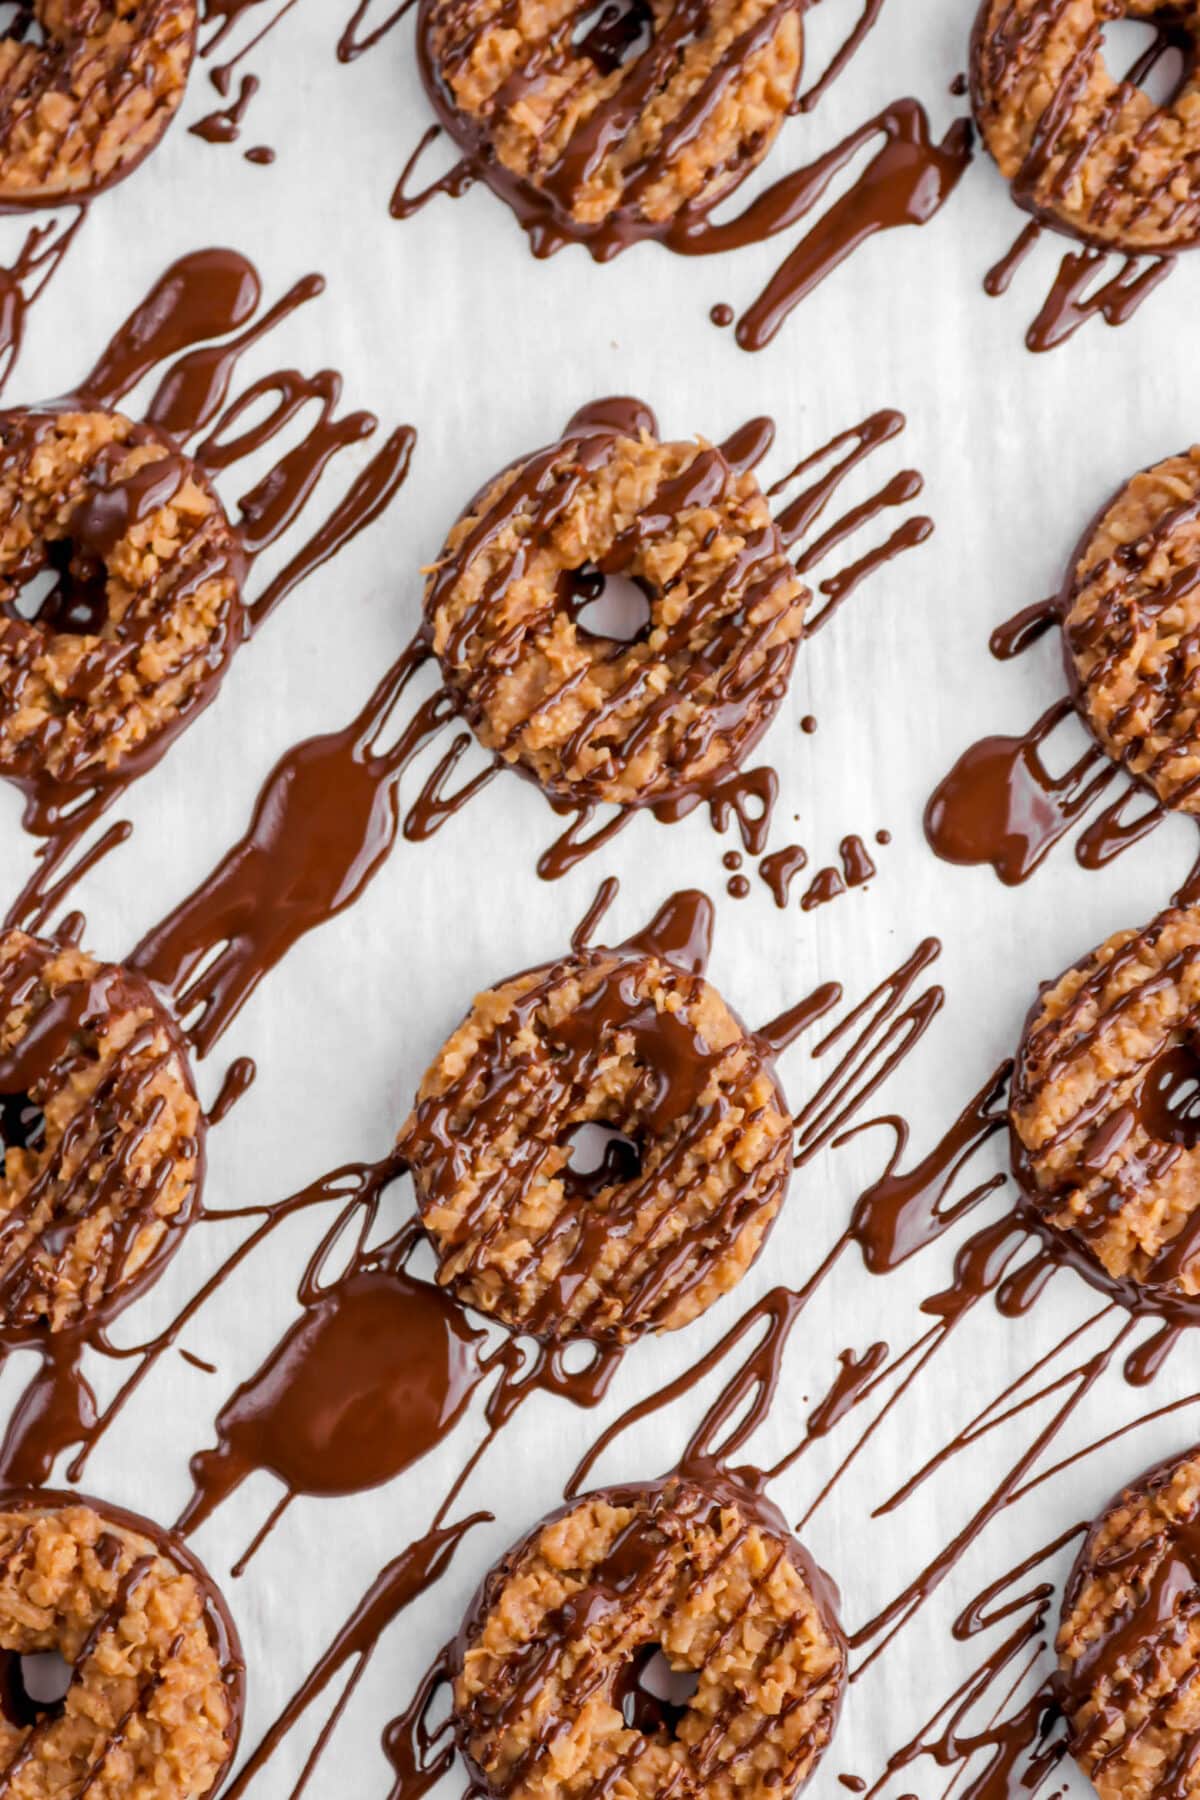 chocolate drizzled over samoas cookies.